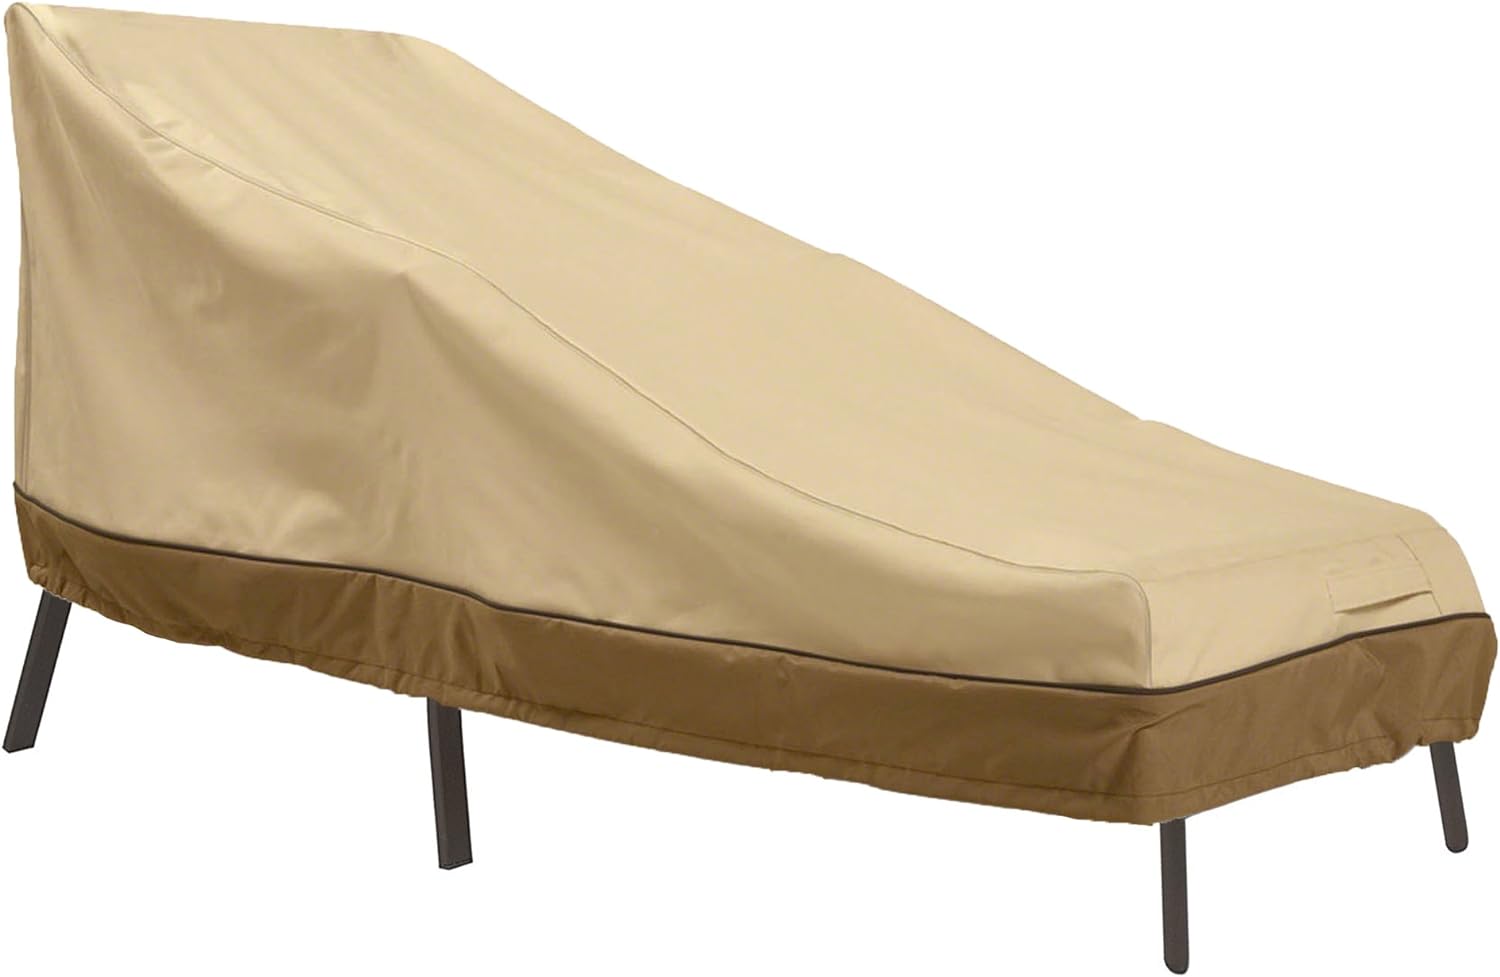 Classic Accessories Veranda Water-Resistant 86 Inch Patio Chaise Lounge Cover, Patio Furniture Covers